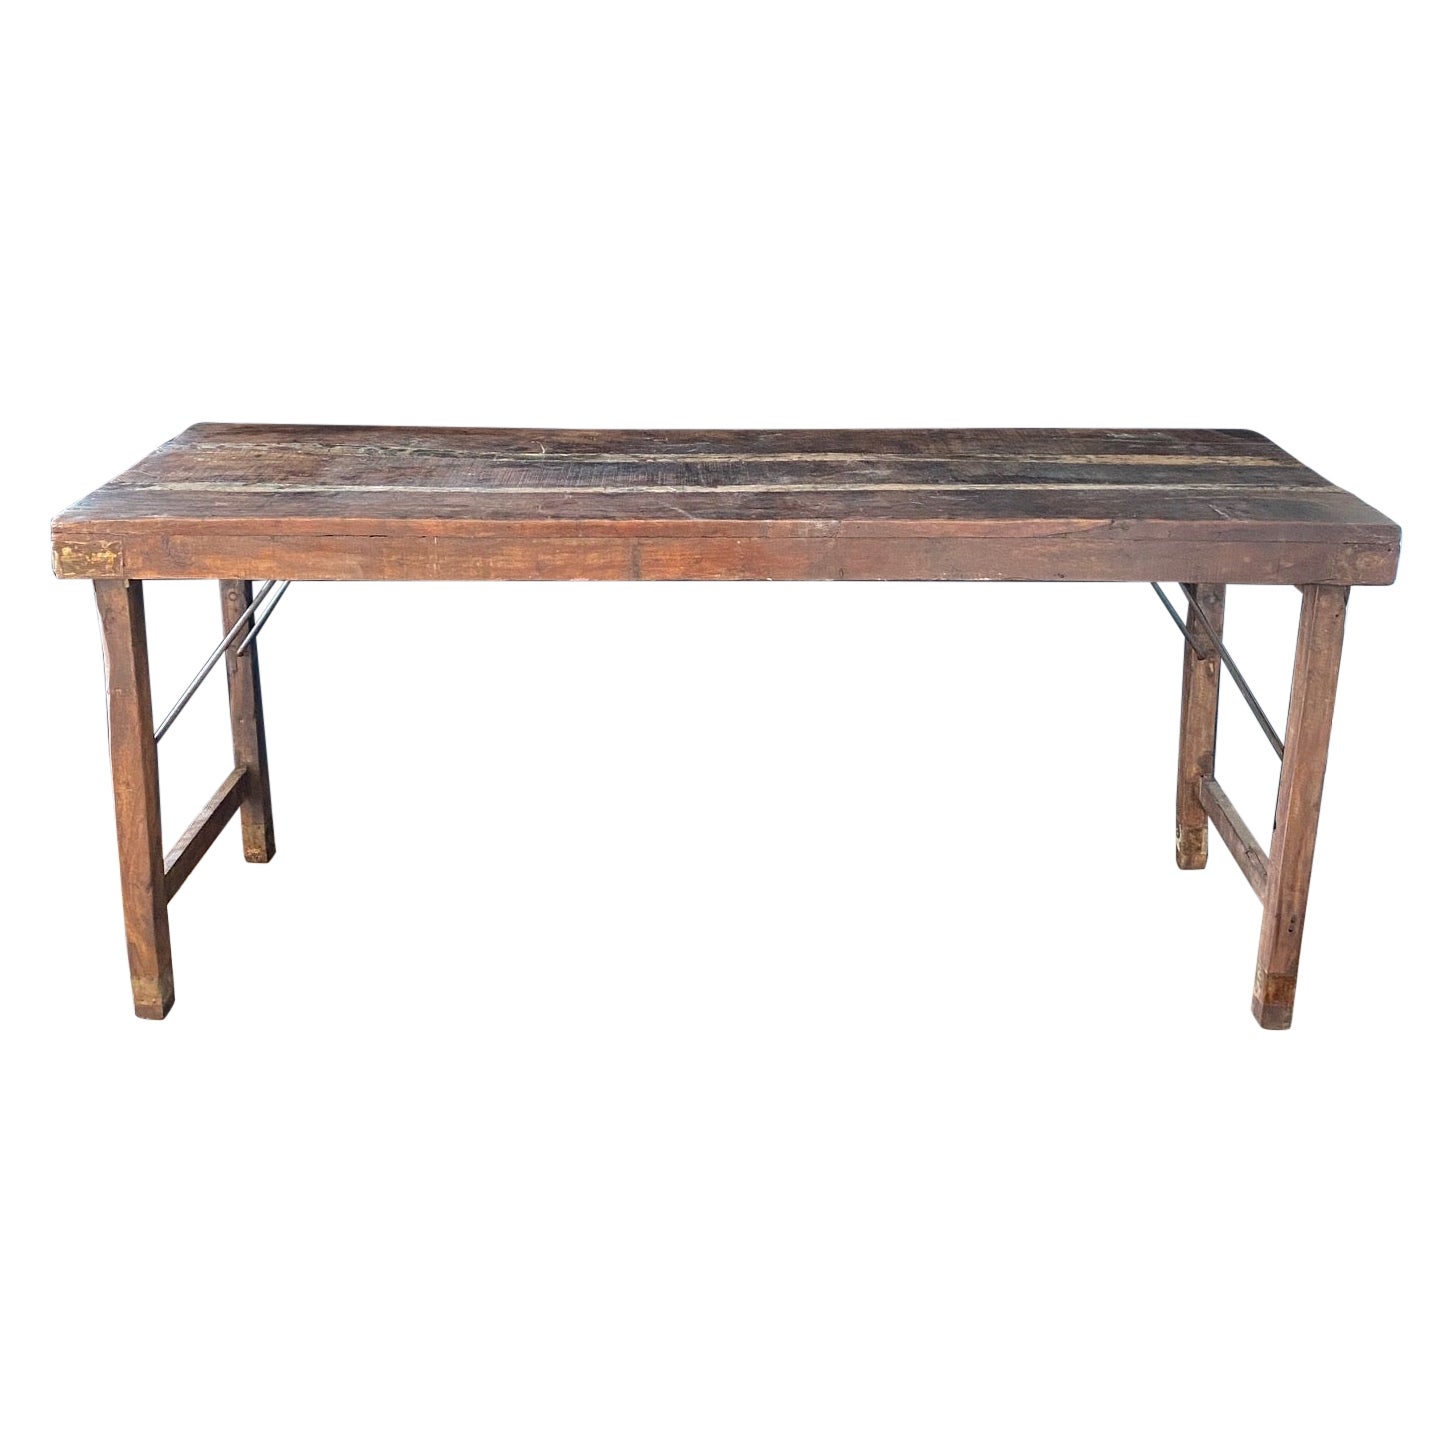 Vintage French Style Rustic Wood and Iron Industrial Work or Dining Table